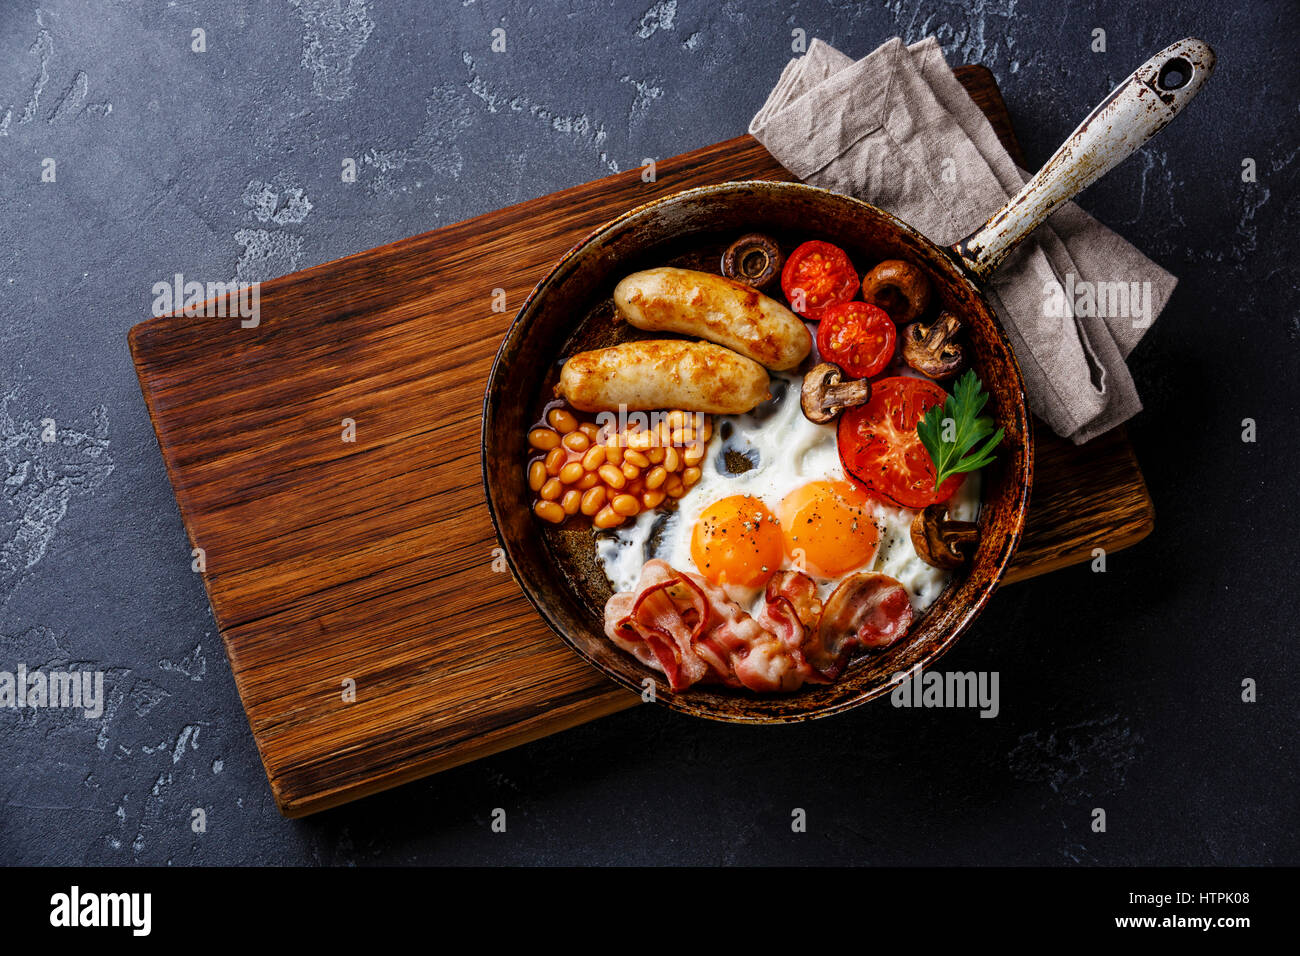 English breakfast in cooking pan with fried eggs, sausages, bacon and beans on dark stone background Stock Photo